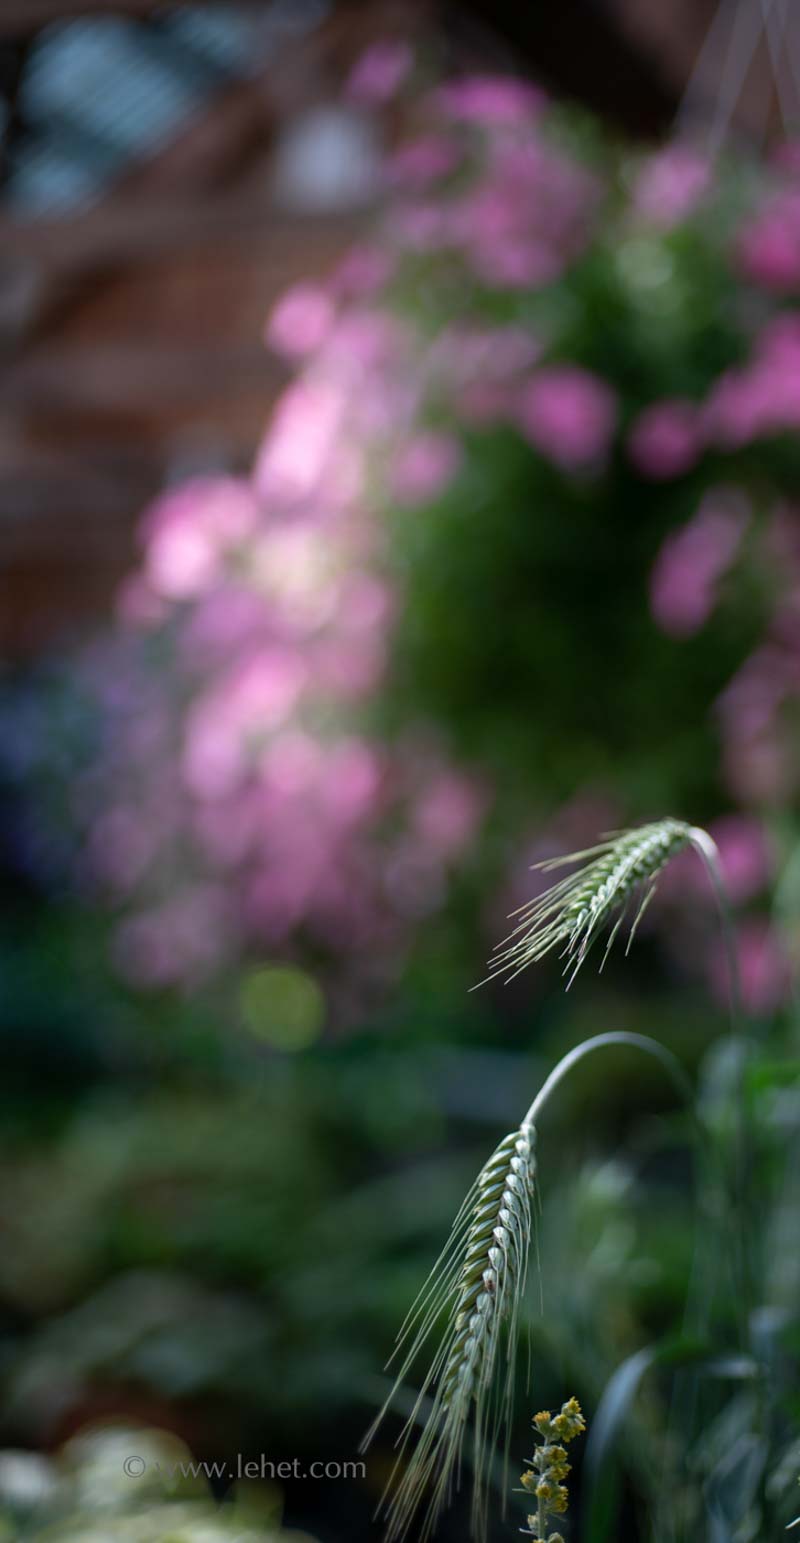 Two Oat Seed Heads with Pink Petunias,Greenhouse